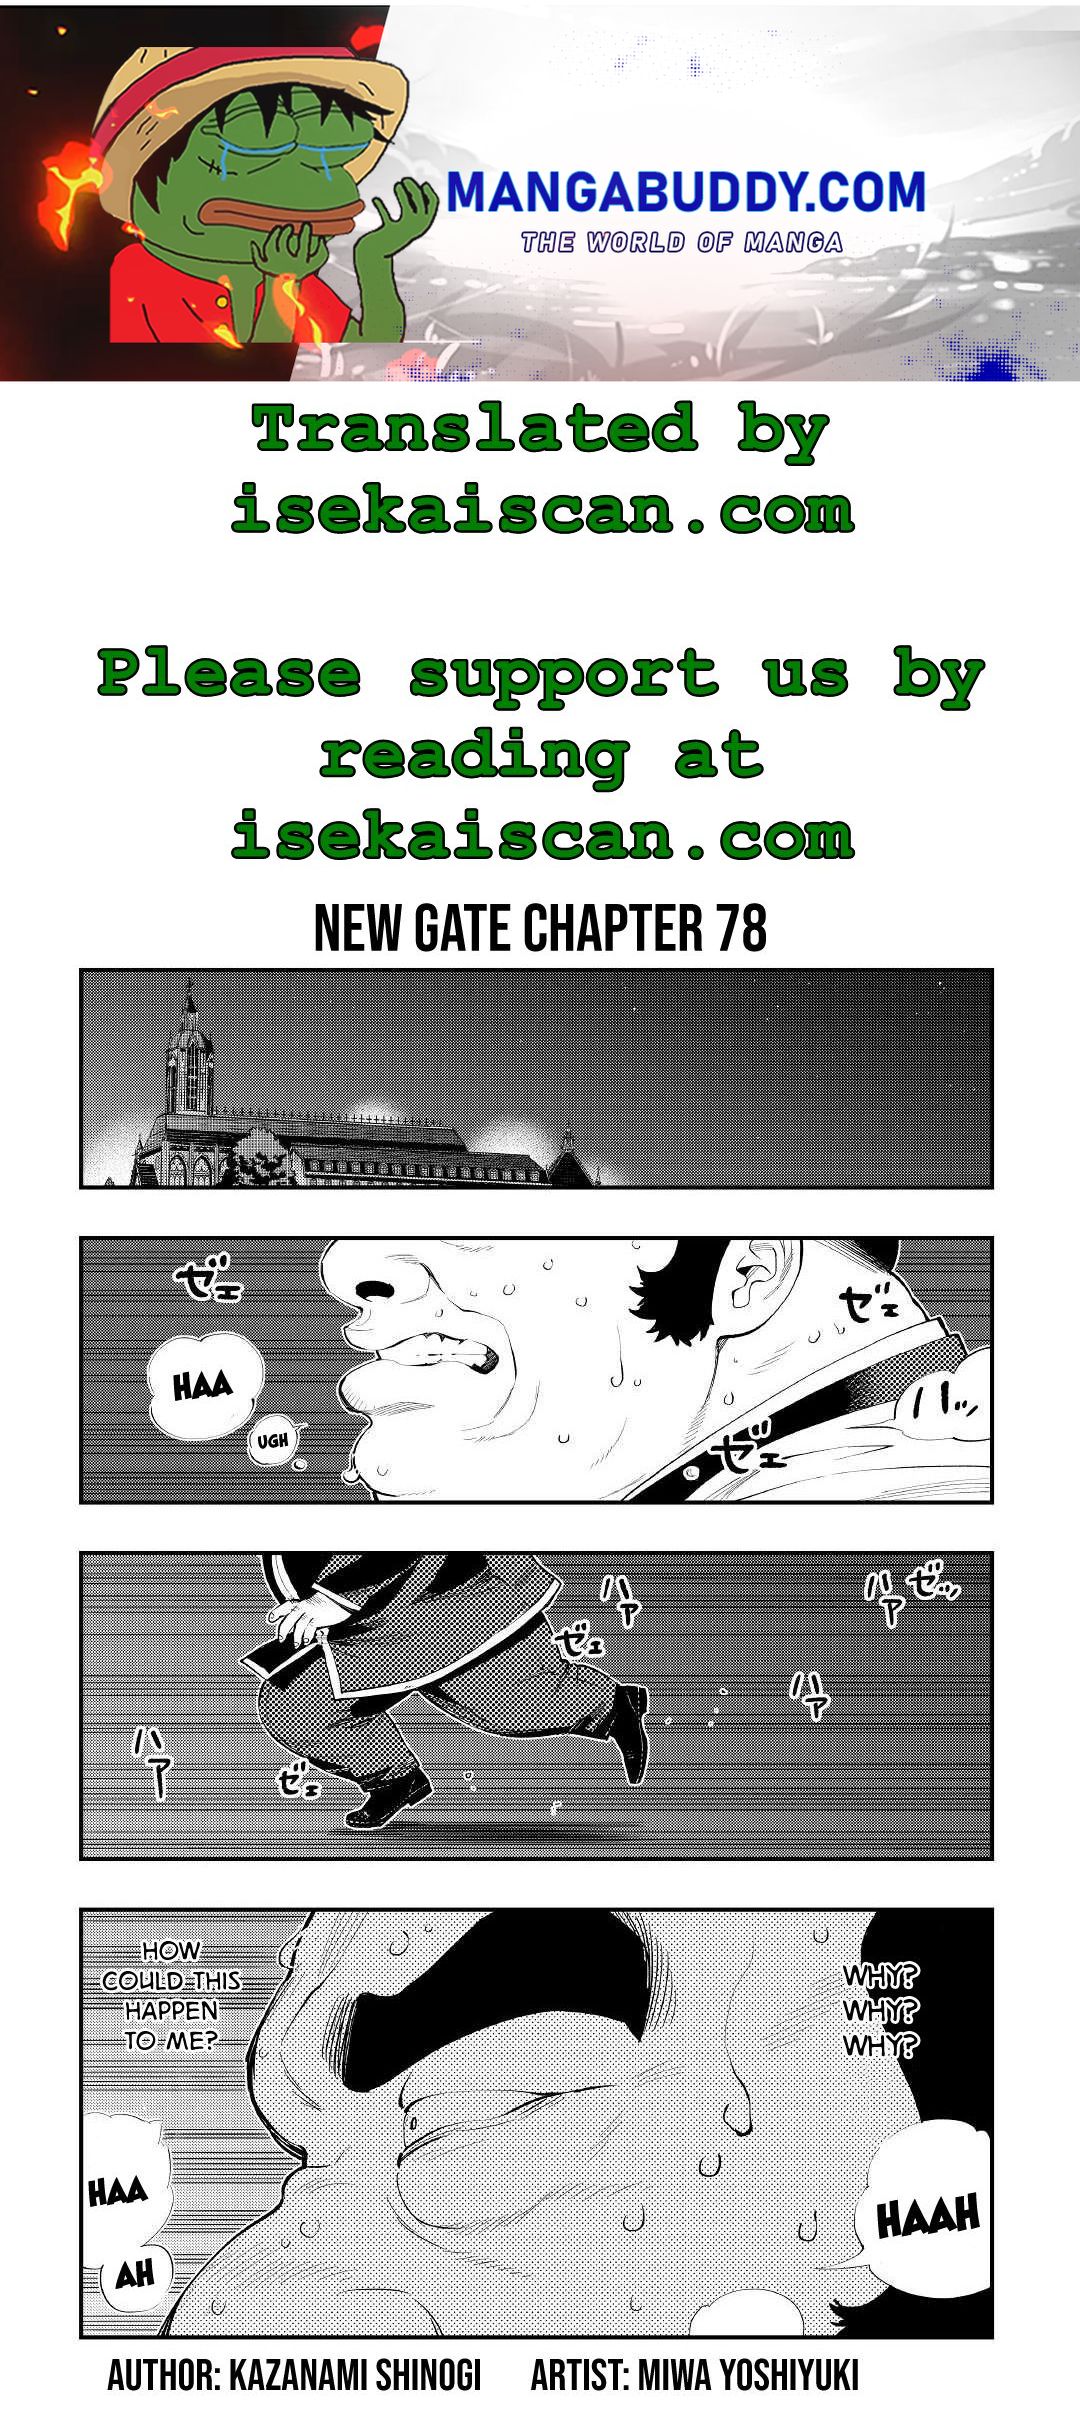 The New Gate Chapter 78 #1